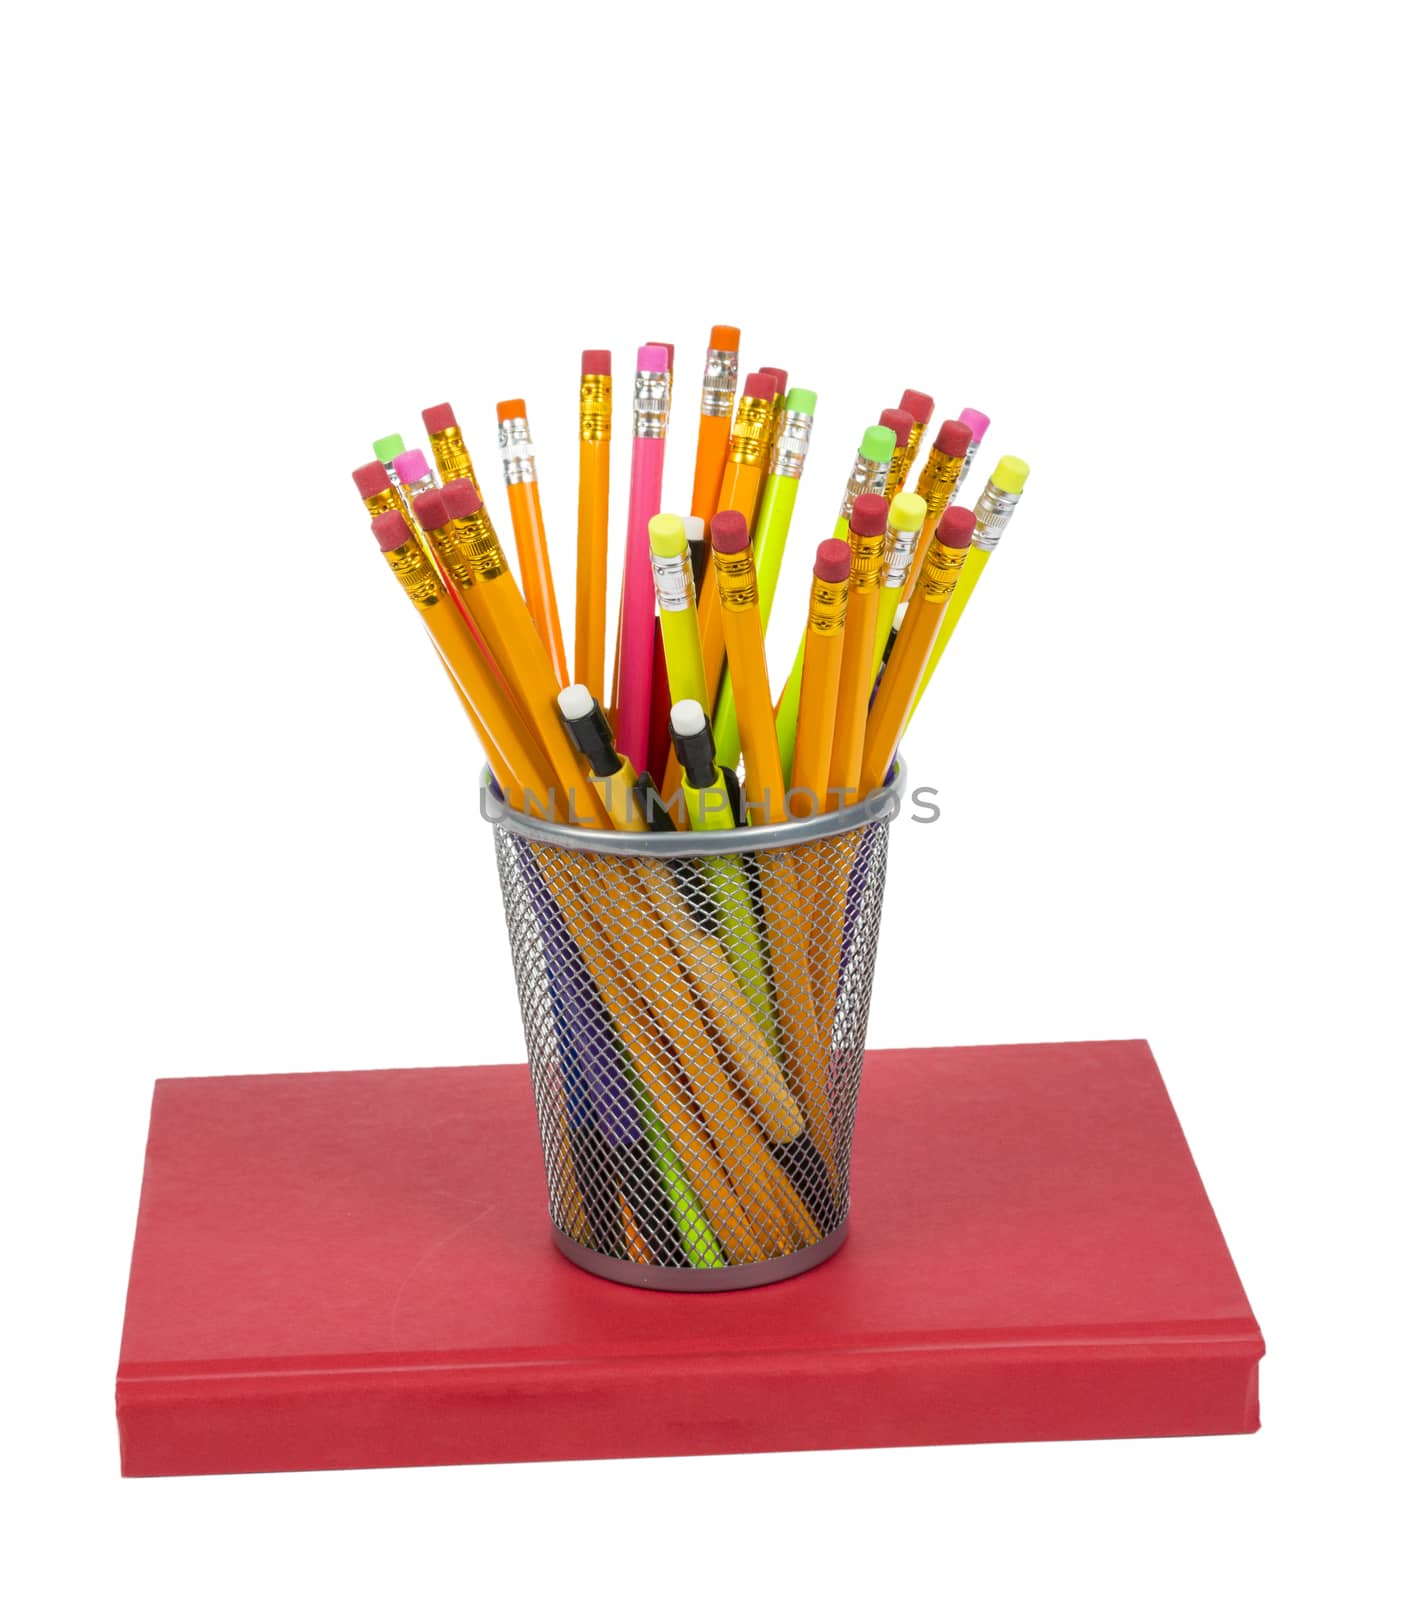 Brightly Colored Pencils Resting On a Red Book by stockbuster1